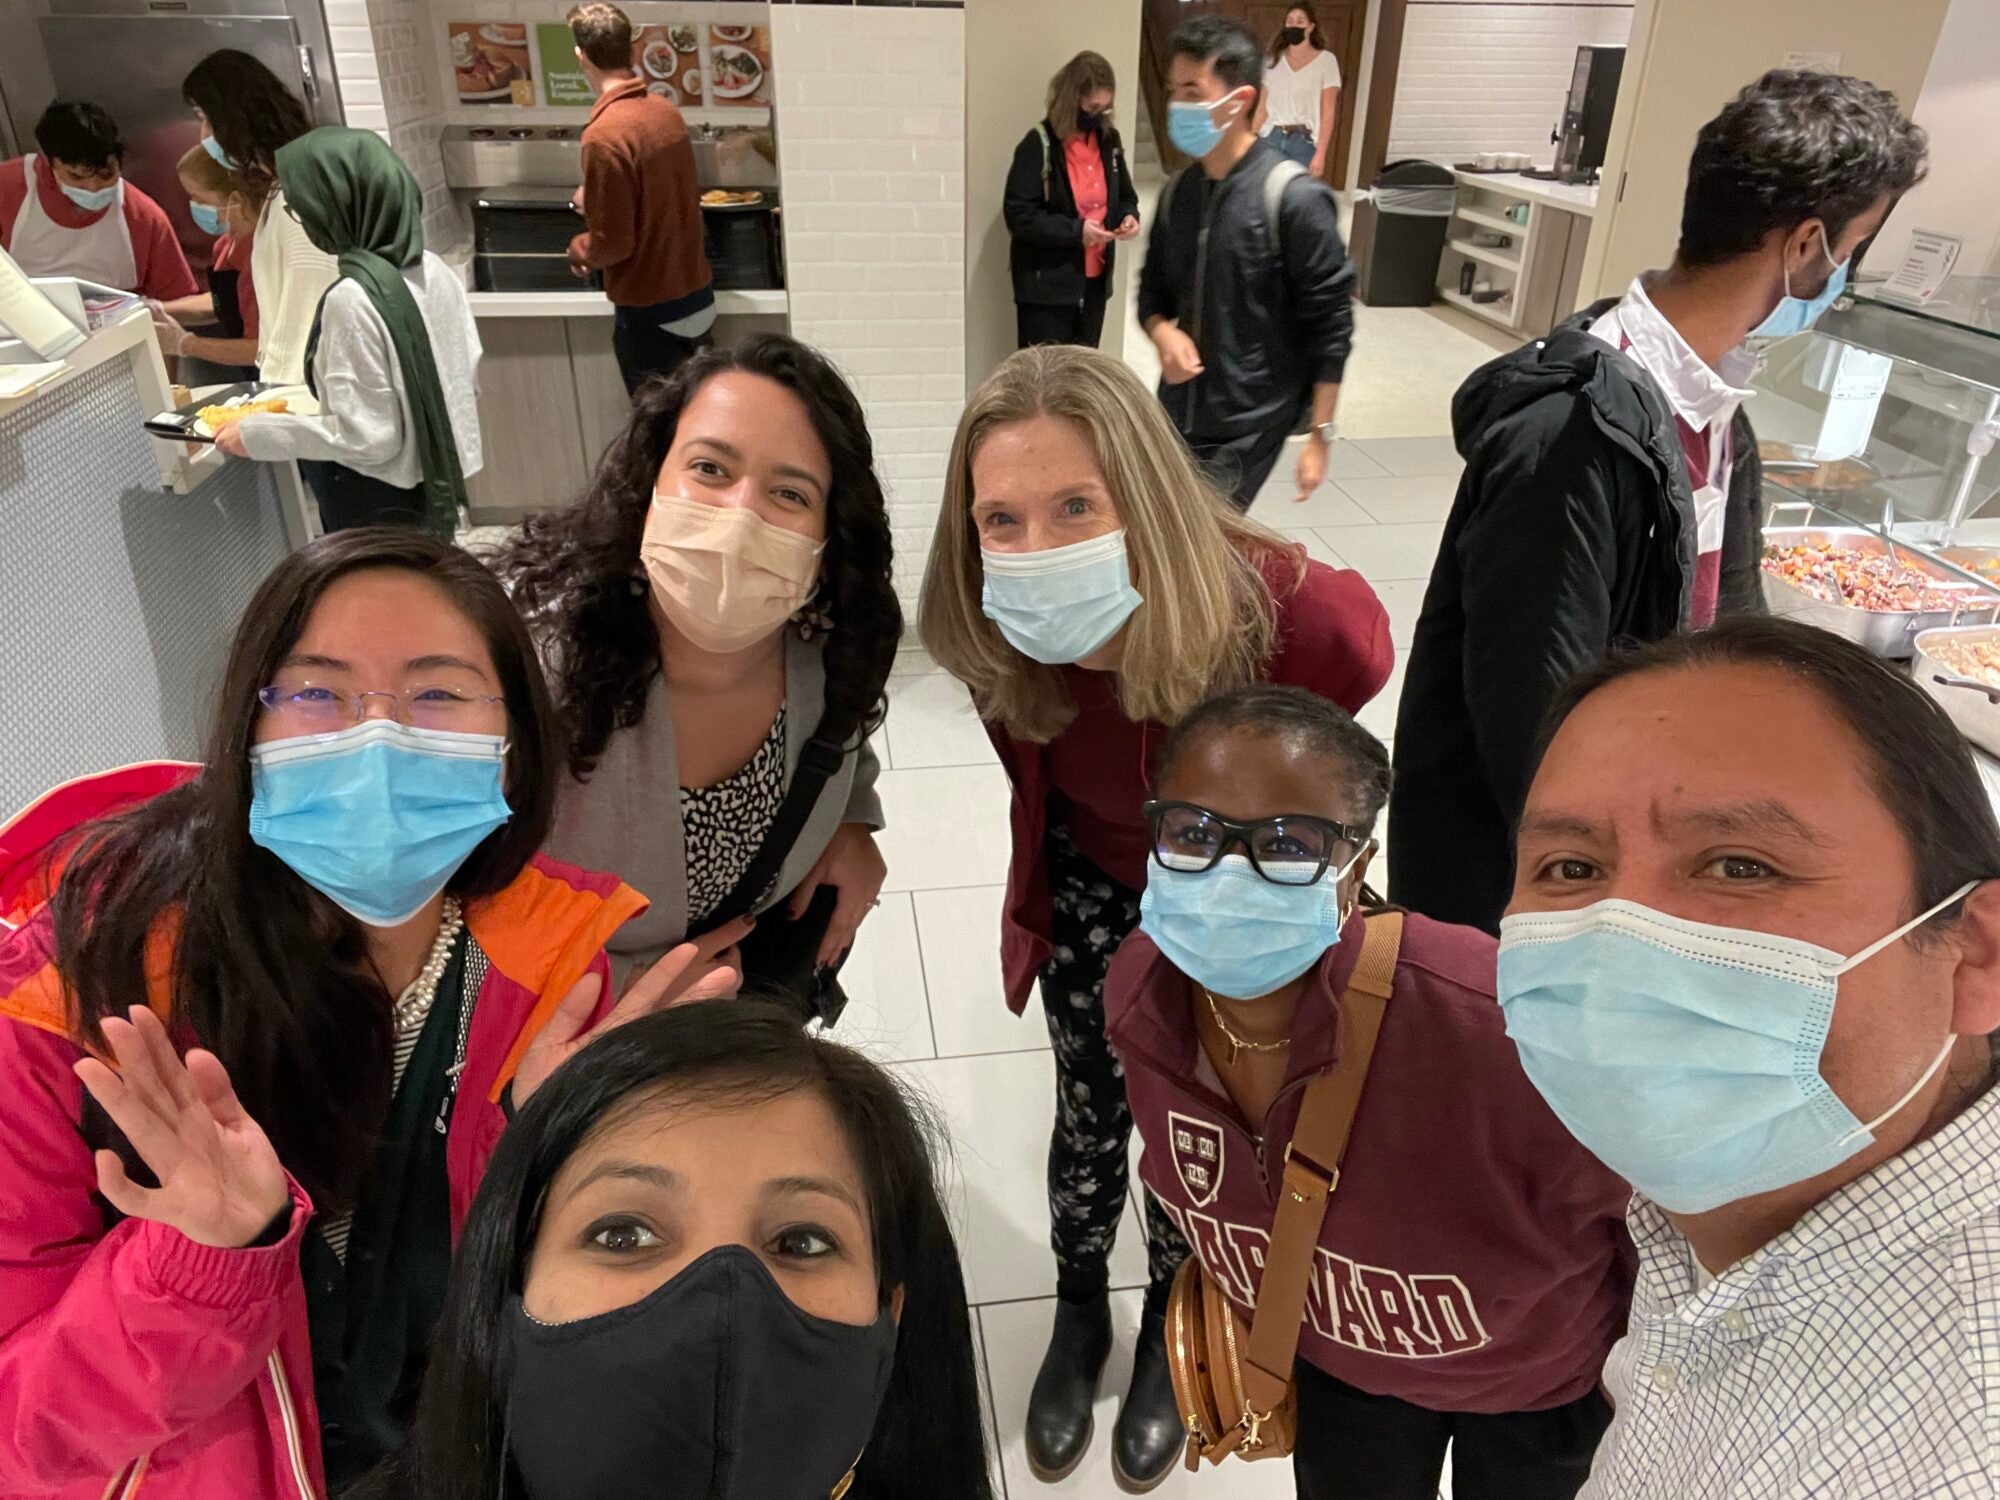 Students with masks on smiling